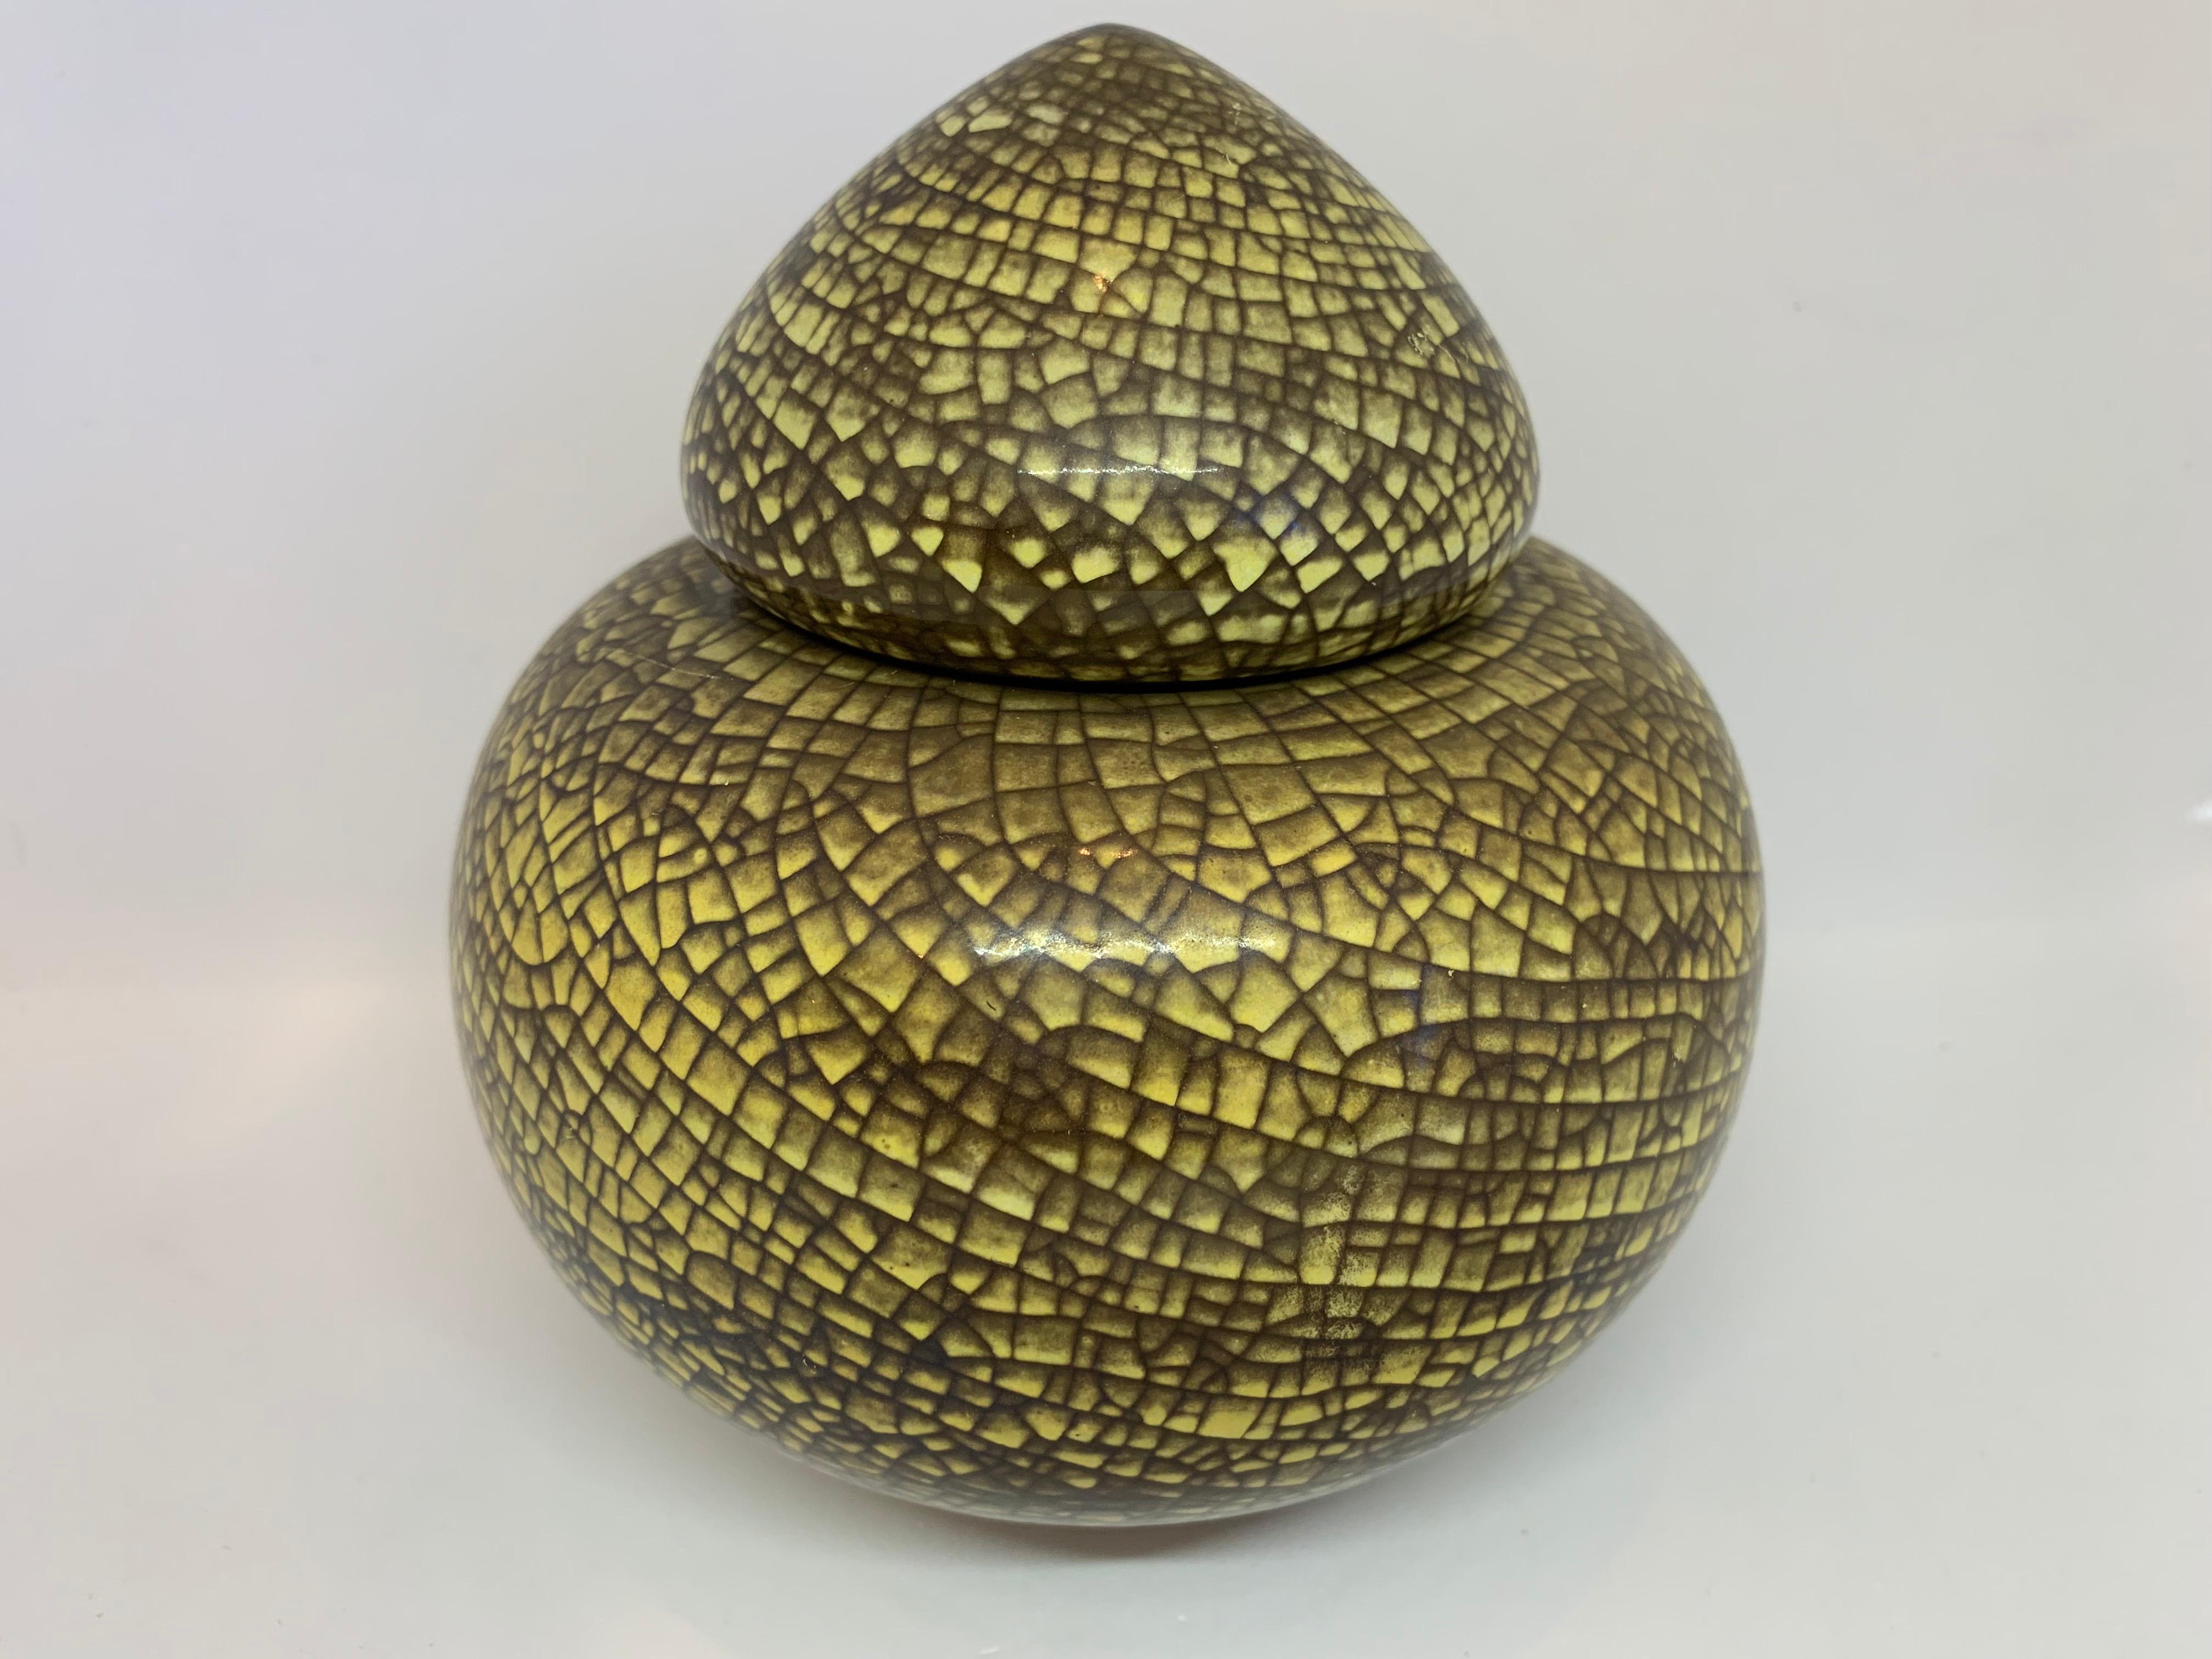 An unusual vintage, 1960s, Michael Anderson & Son, ceramic urn or lidded vase. The yellow urn is overlaid with a crazed green crackle effect design over its surface. A rounded conical lid fits loosely in the top. The base is iridescent with the